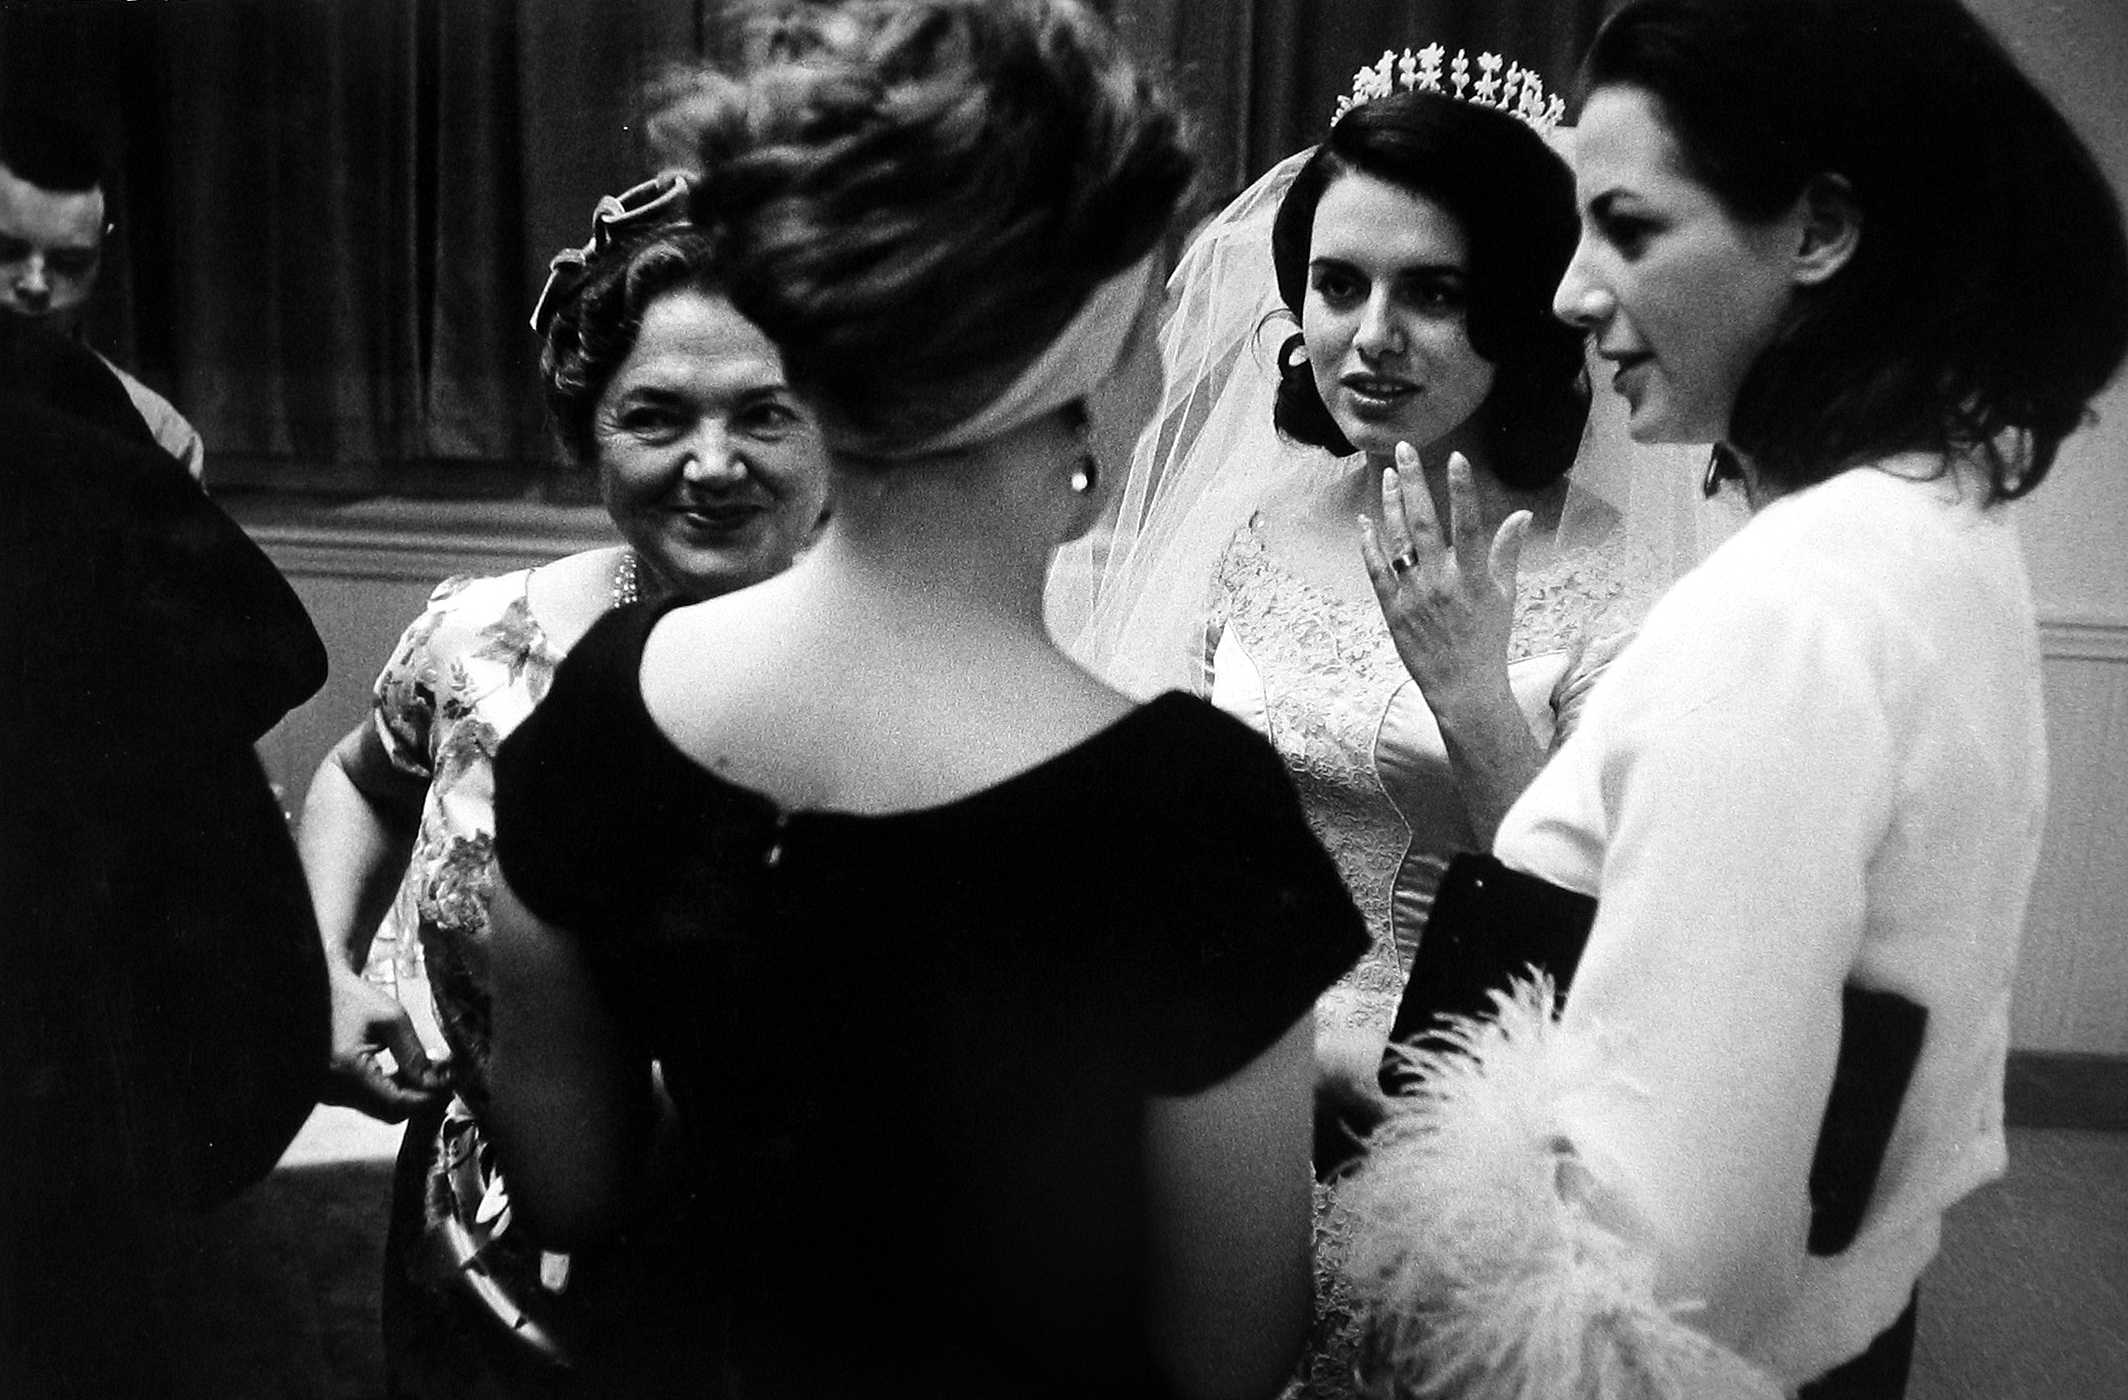 Garry Winogrand: The Wedding, South Gallery